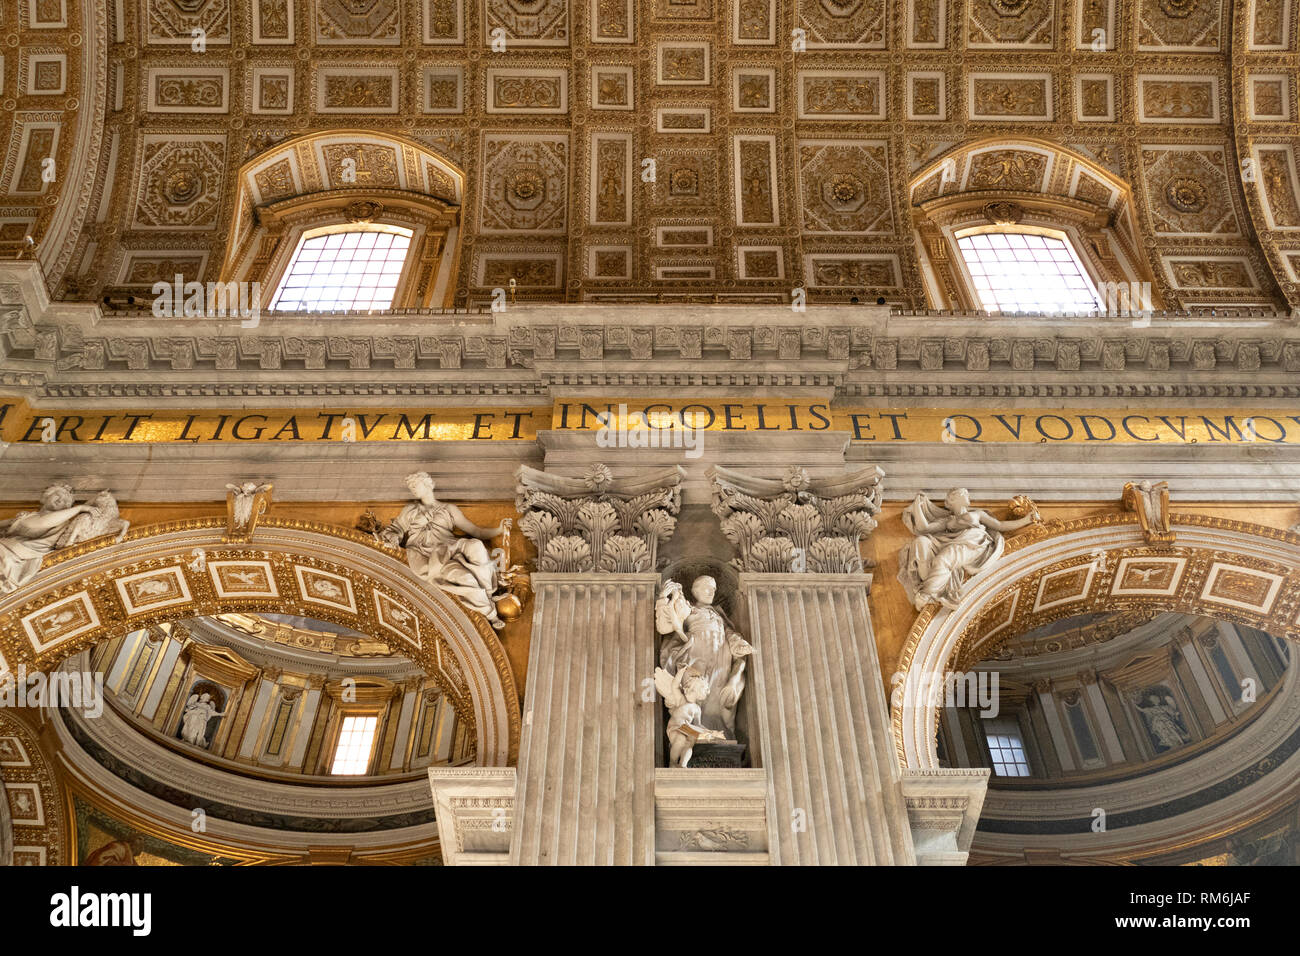 interior of the St. Peter's Basilica, San Pietro in Vaticano, Papal Basilica of St. Peter in the Vatican, Rome, Italy Stock Photo